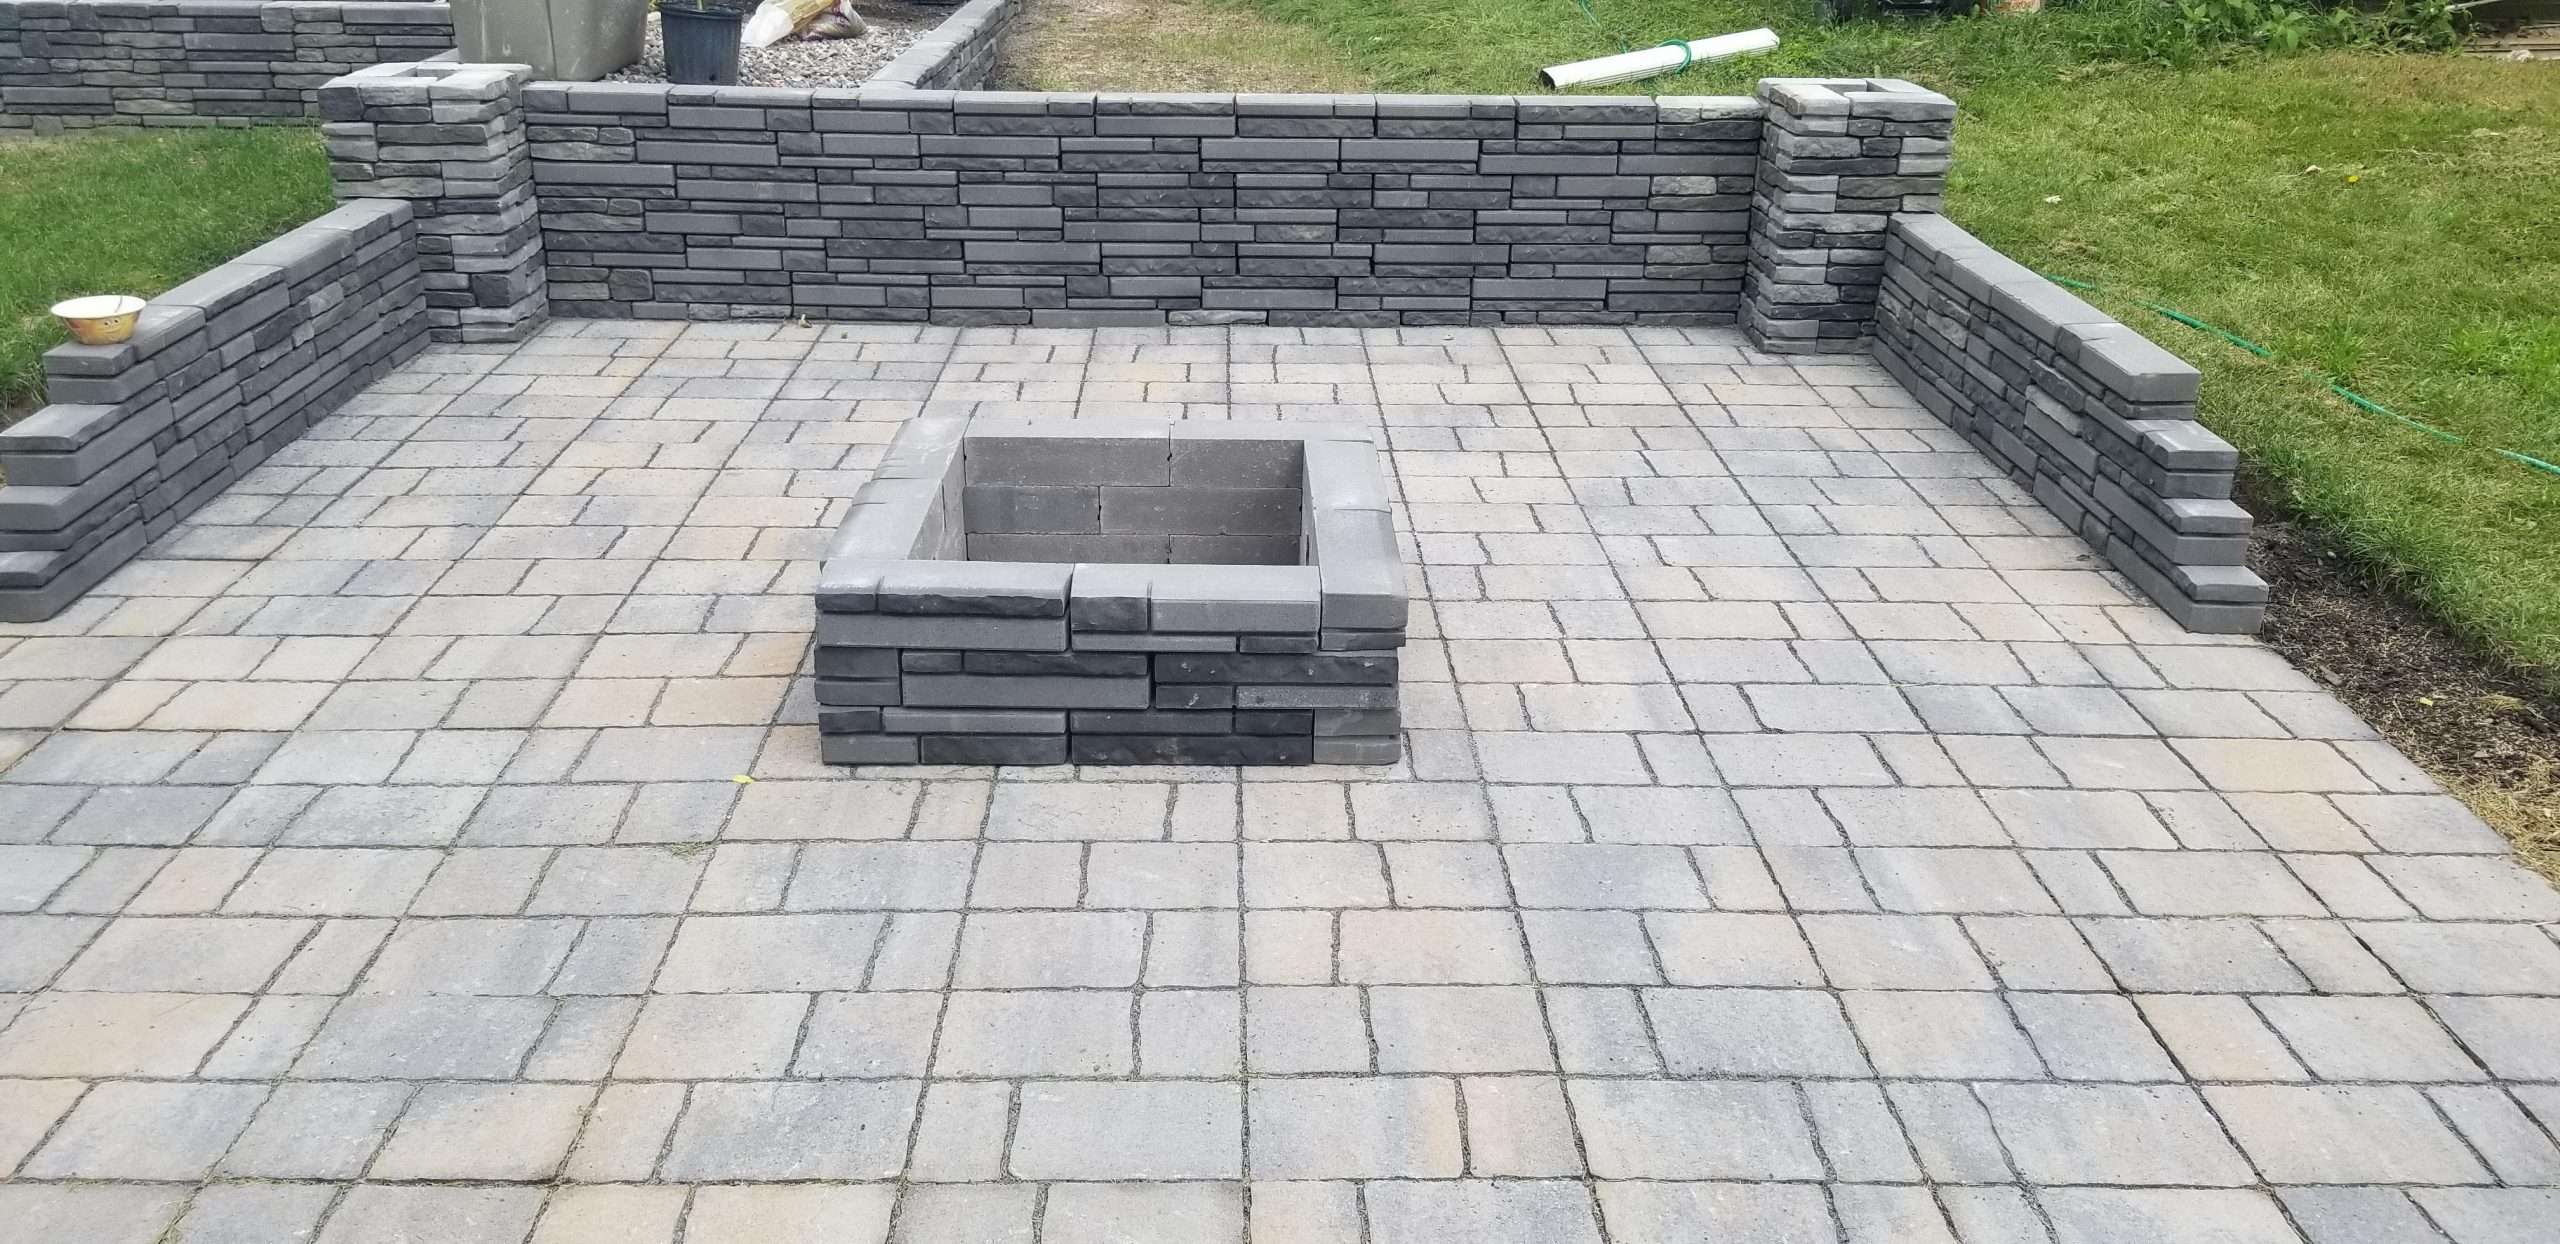 How To Build A Fire Pit Patio With Pavers